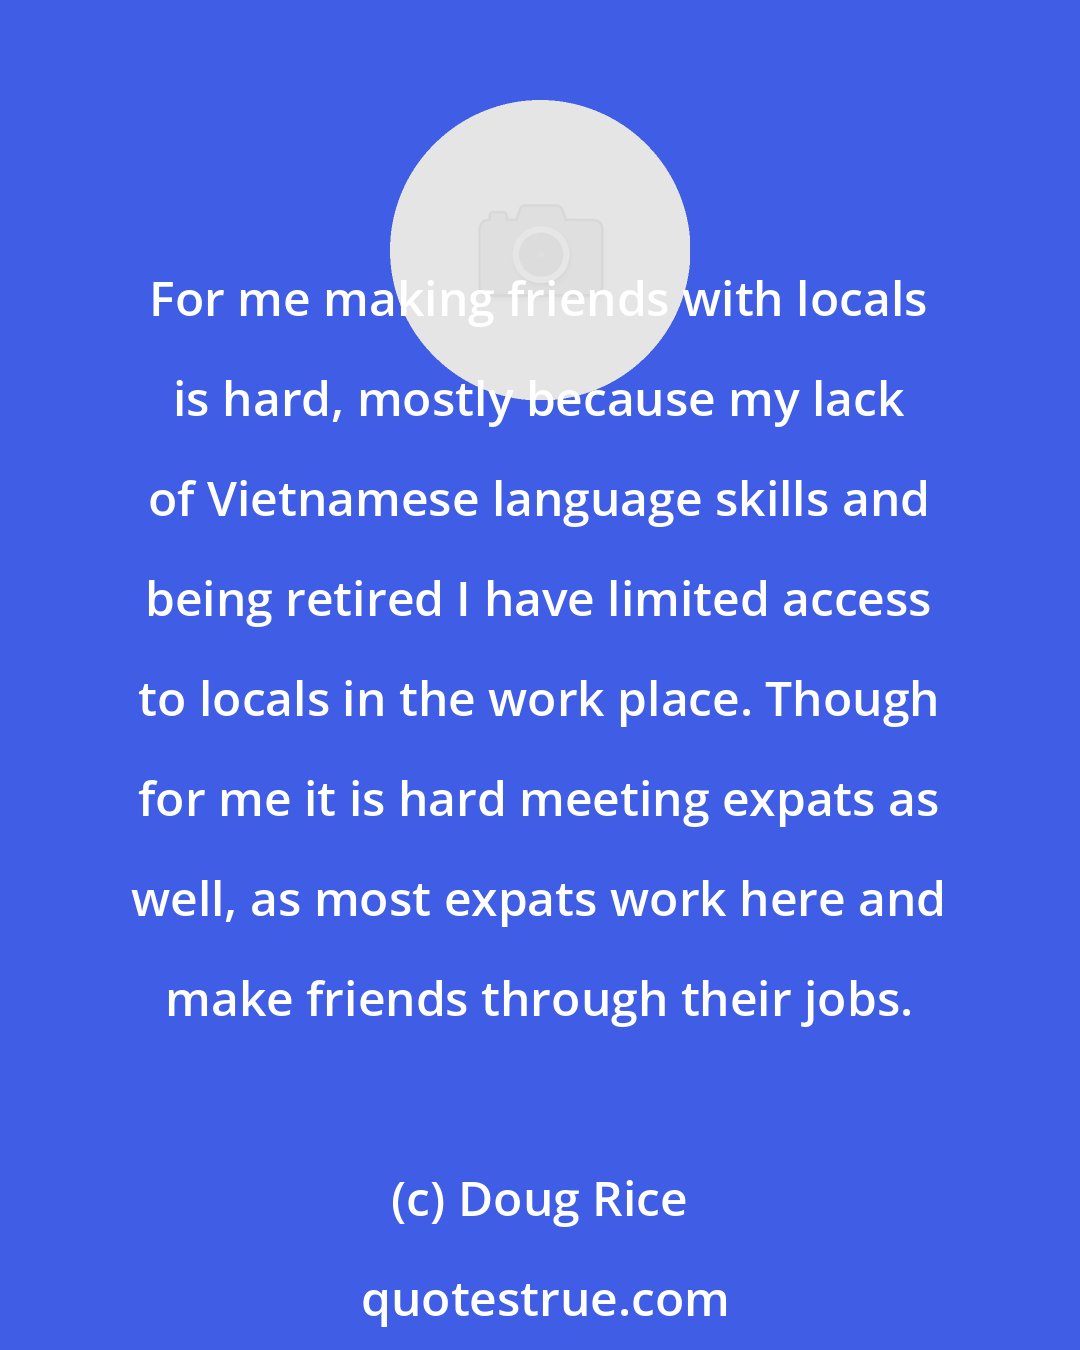 Doug Rice: For me making friends with locals is hard, mostly because my lack of Vietnamese language skills and being retired I have limited access to locals in the work place. Though for me it is hard meeting expats as well, as most expats work here and make friends through their jobs.